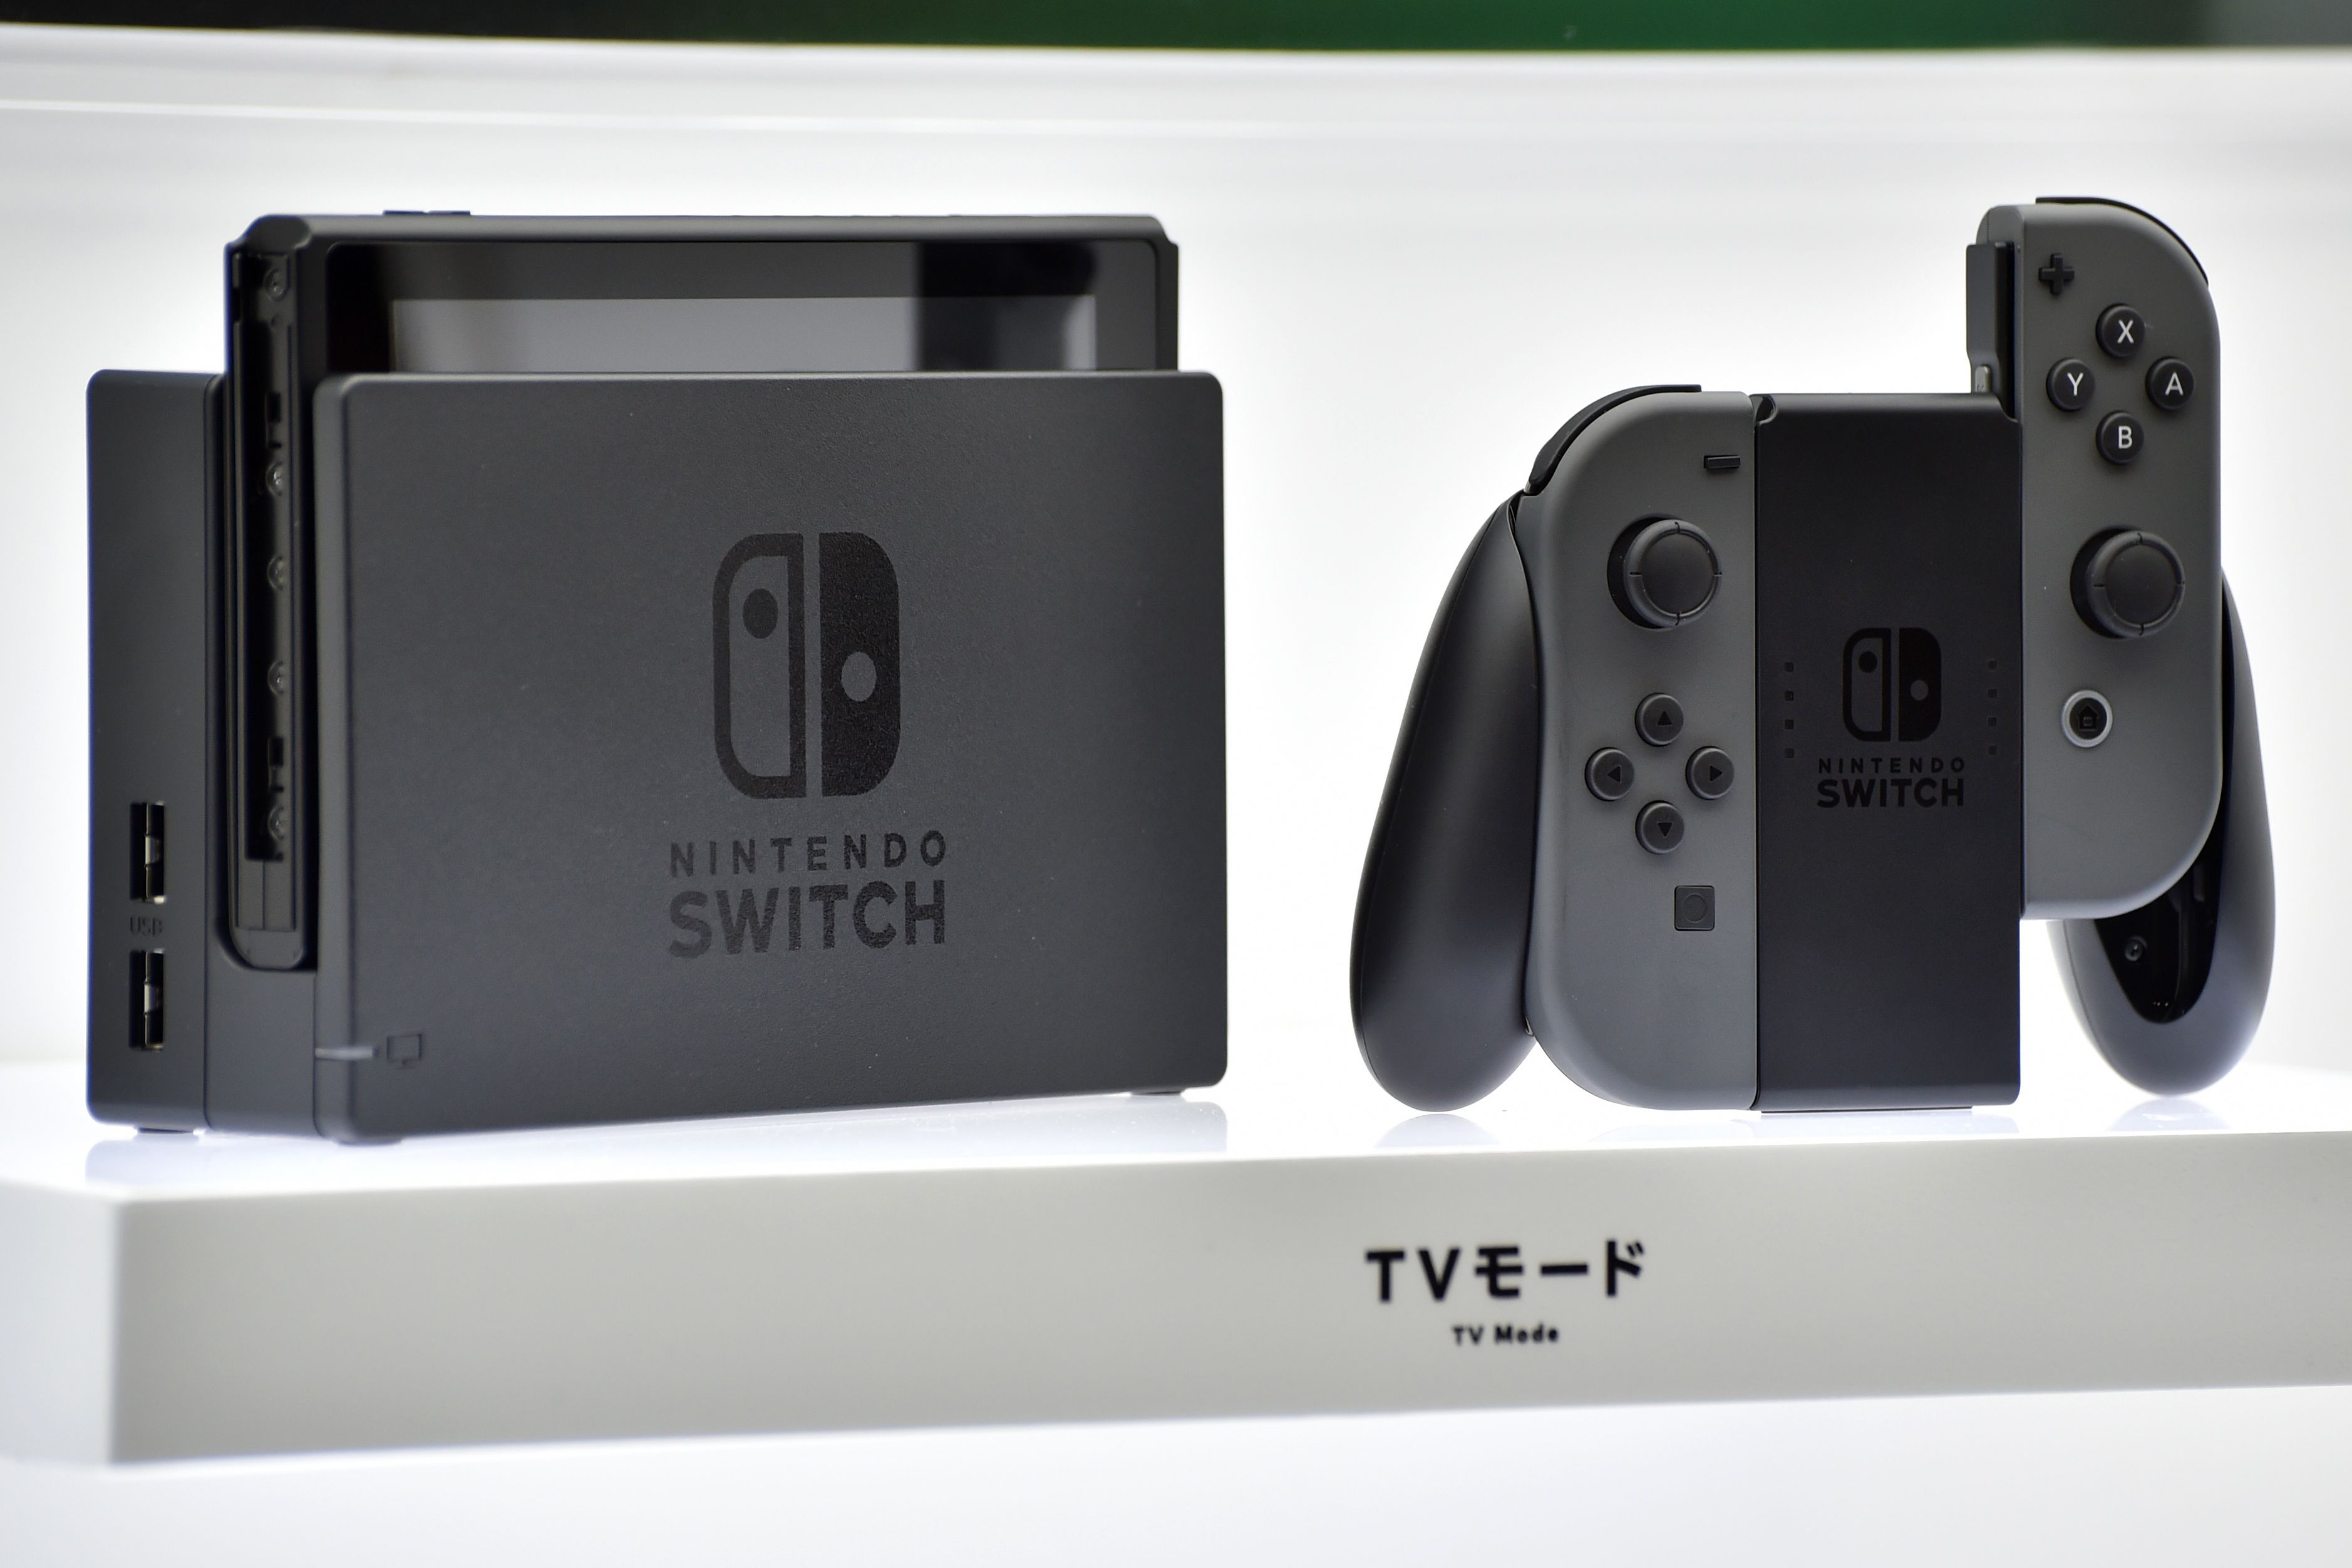 Nintendo's new video game console Switch is displayed at a presentation in Tokyo on January 13, 2017. 
                      Nintendo on January 13 unveiled its new Switch game console, which works both at home and on-the-go, as it looks to offset disappointing Wii U sales and go head to head with rival Sony's hugely popular PlayStation 4. / AFP / Kazuhiro NOGI        (Photo credit should read KAZUHIRO NOGI/AFP/Getty Images) (KAZUHIRO NOGI&mdash;AFP/Getty Images)